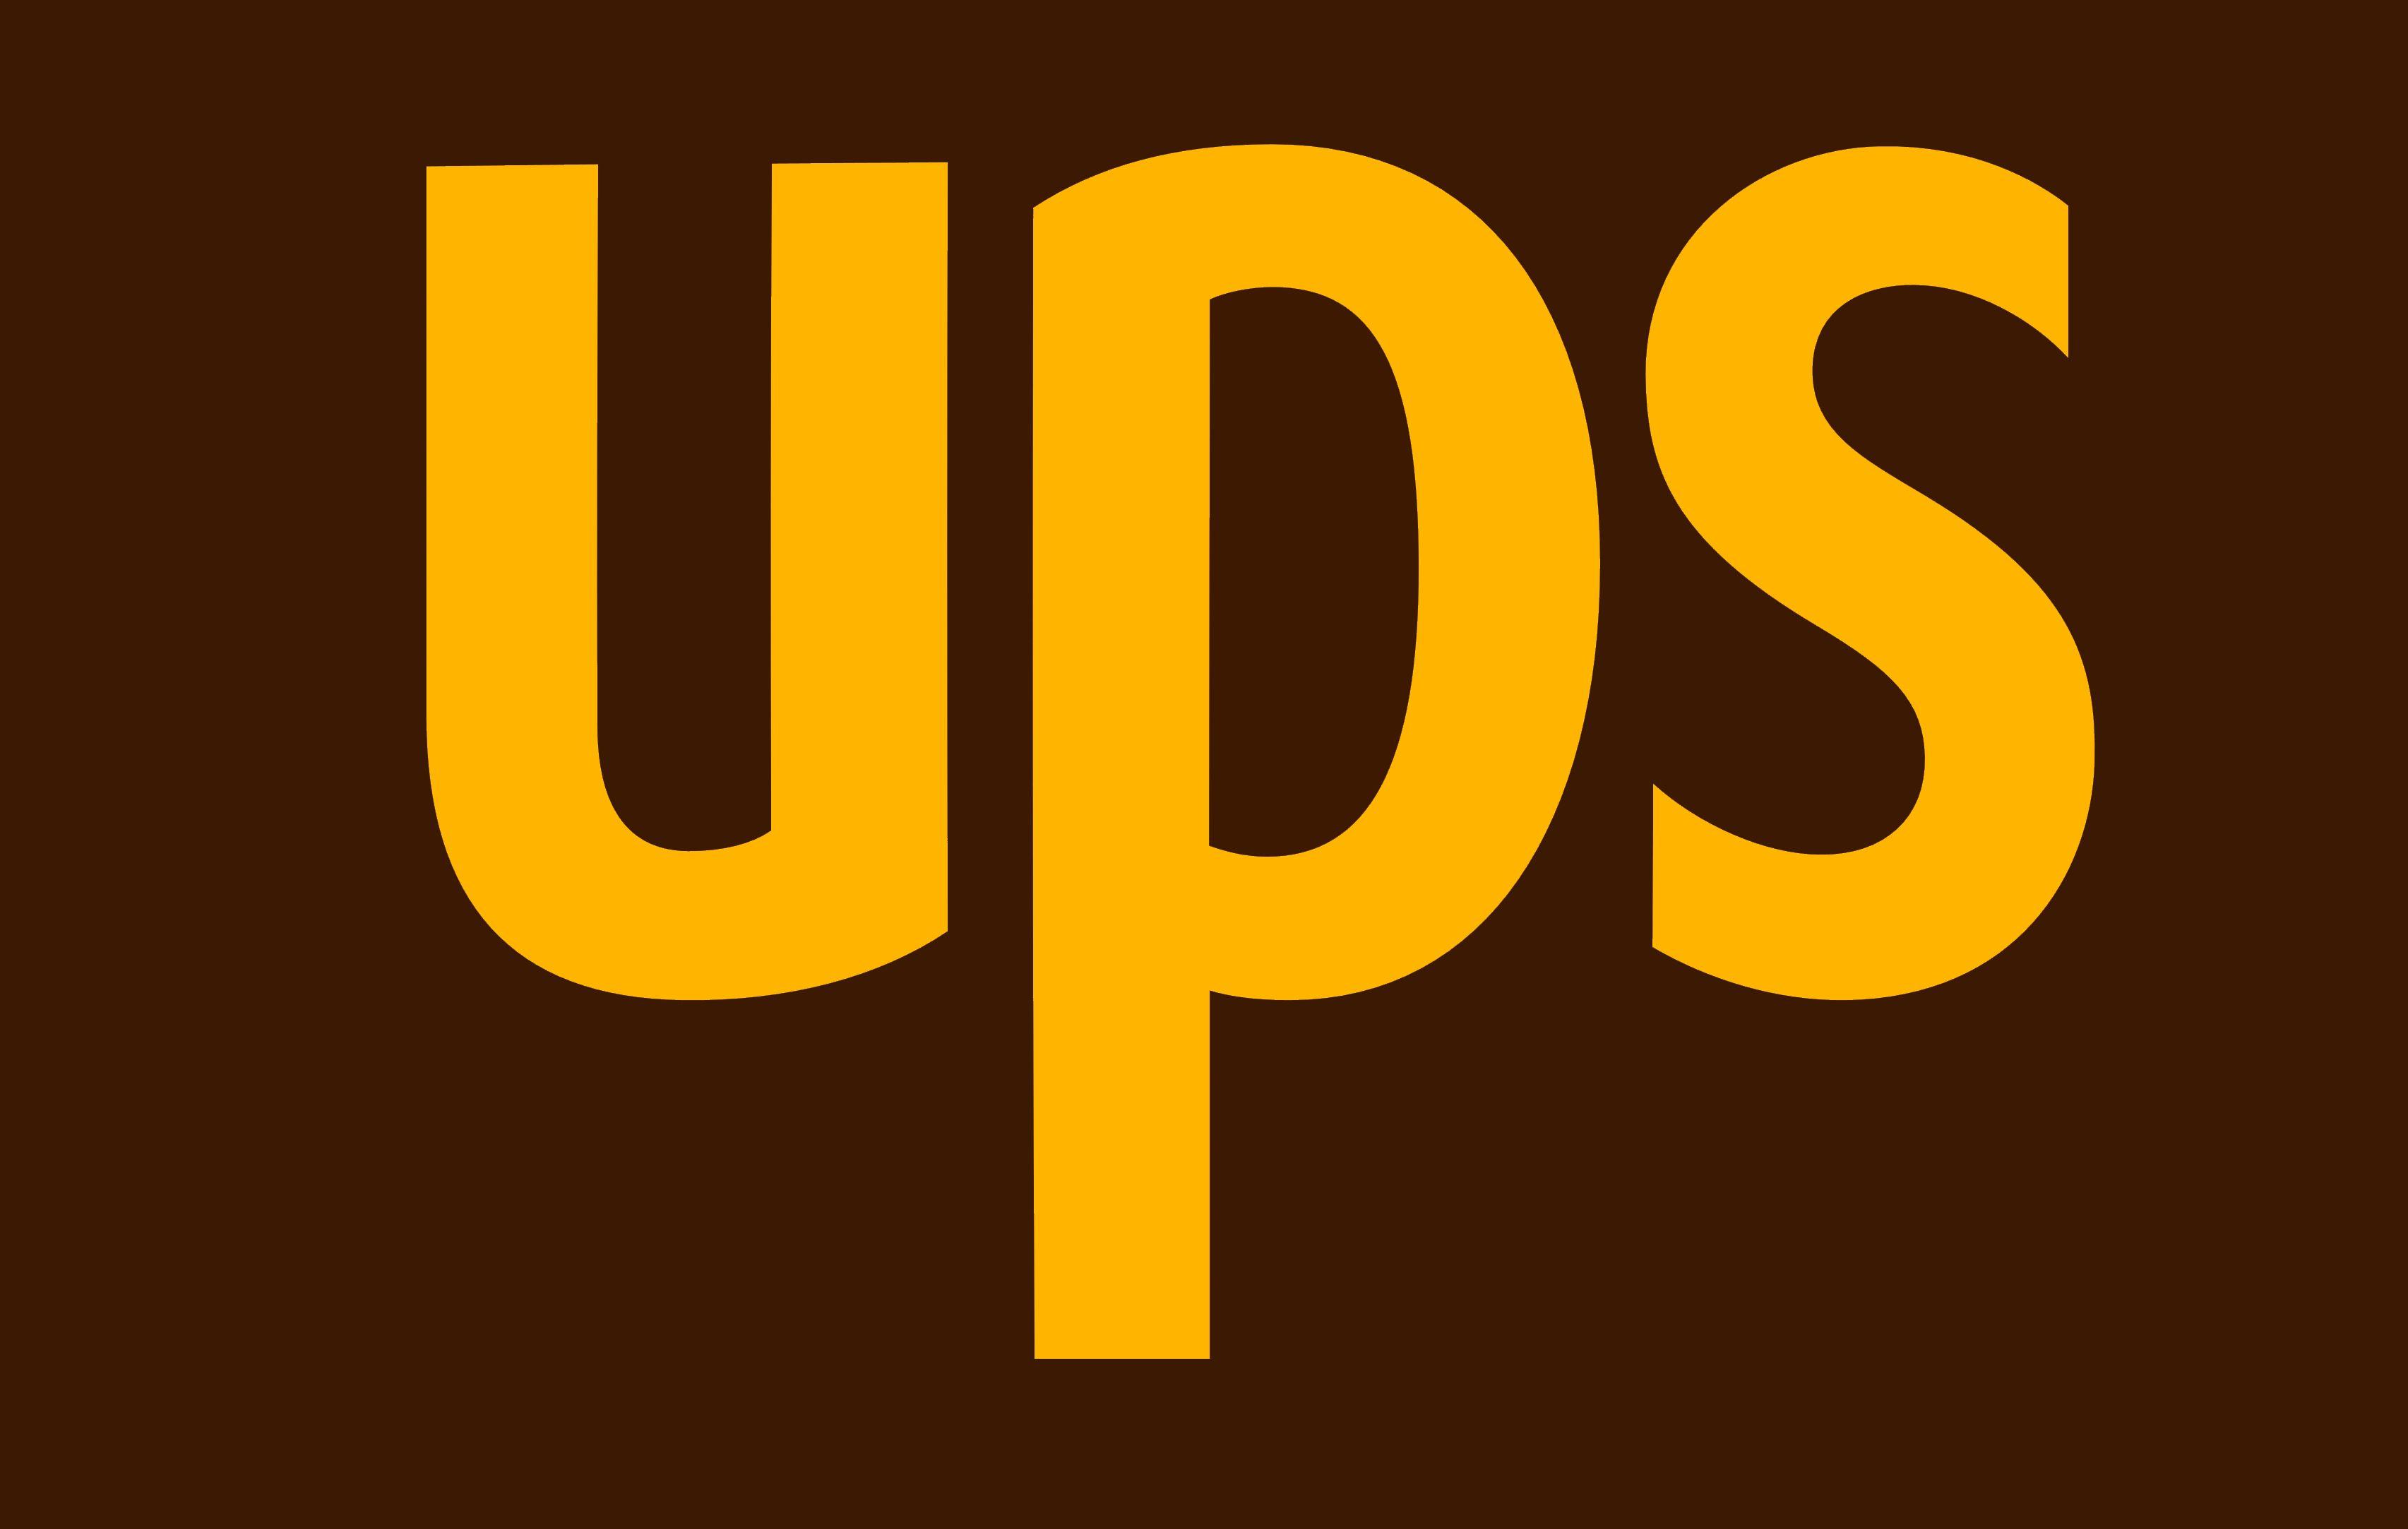 Ups.com Logo - Meaning United Parcel Service logo and symbol | history and evolution